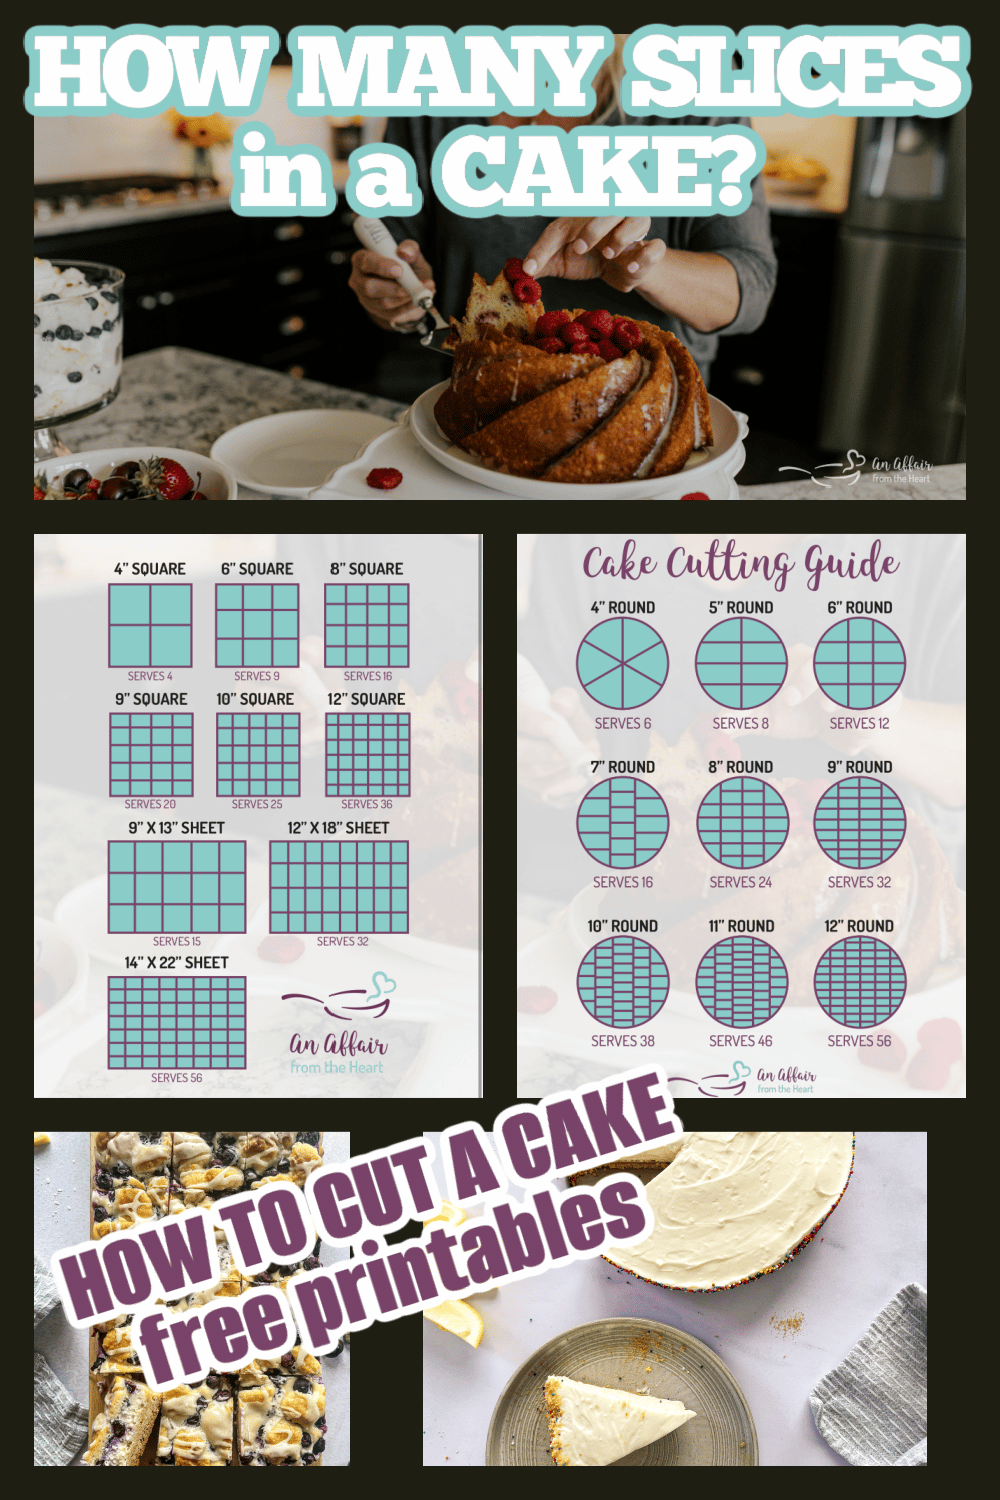 Puzzle for Testing Your IQ: Only a Genius can divide the cake into 8 pieces  by making only 3 cuts in 21 secs!